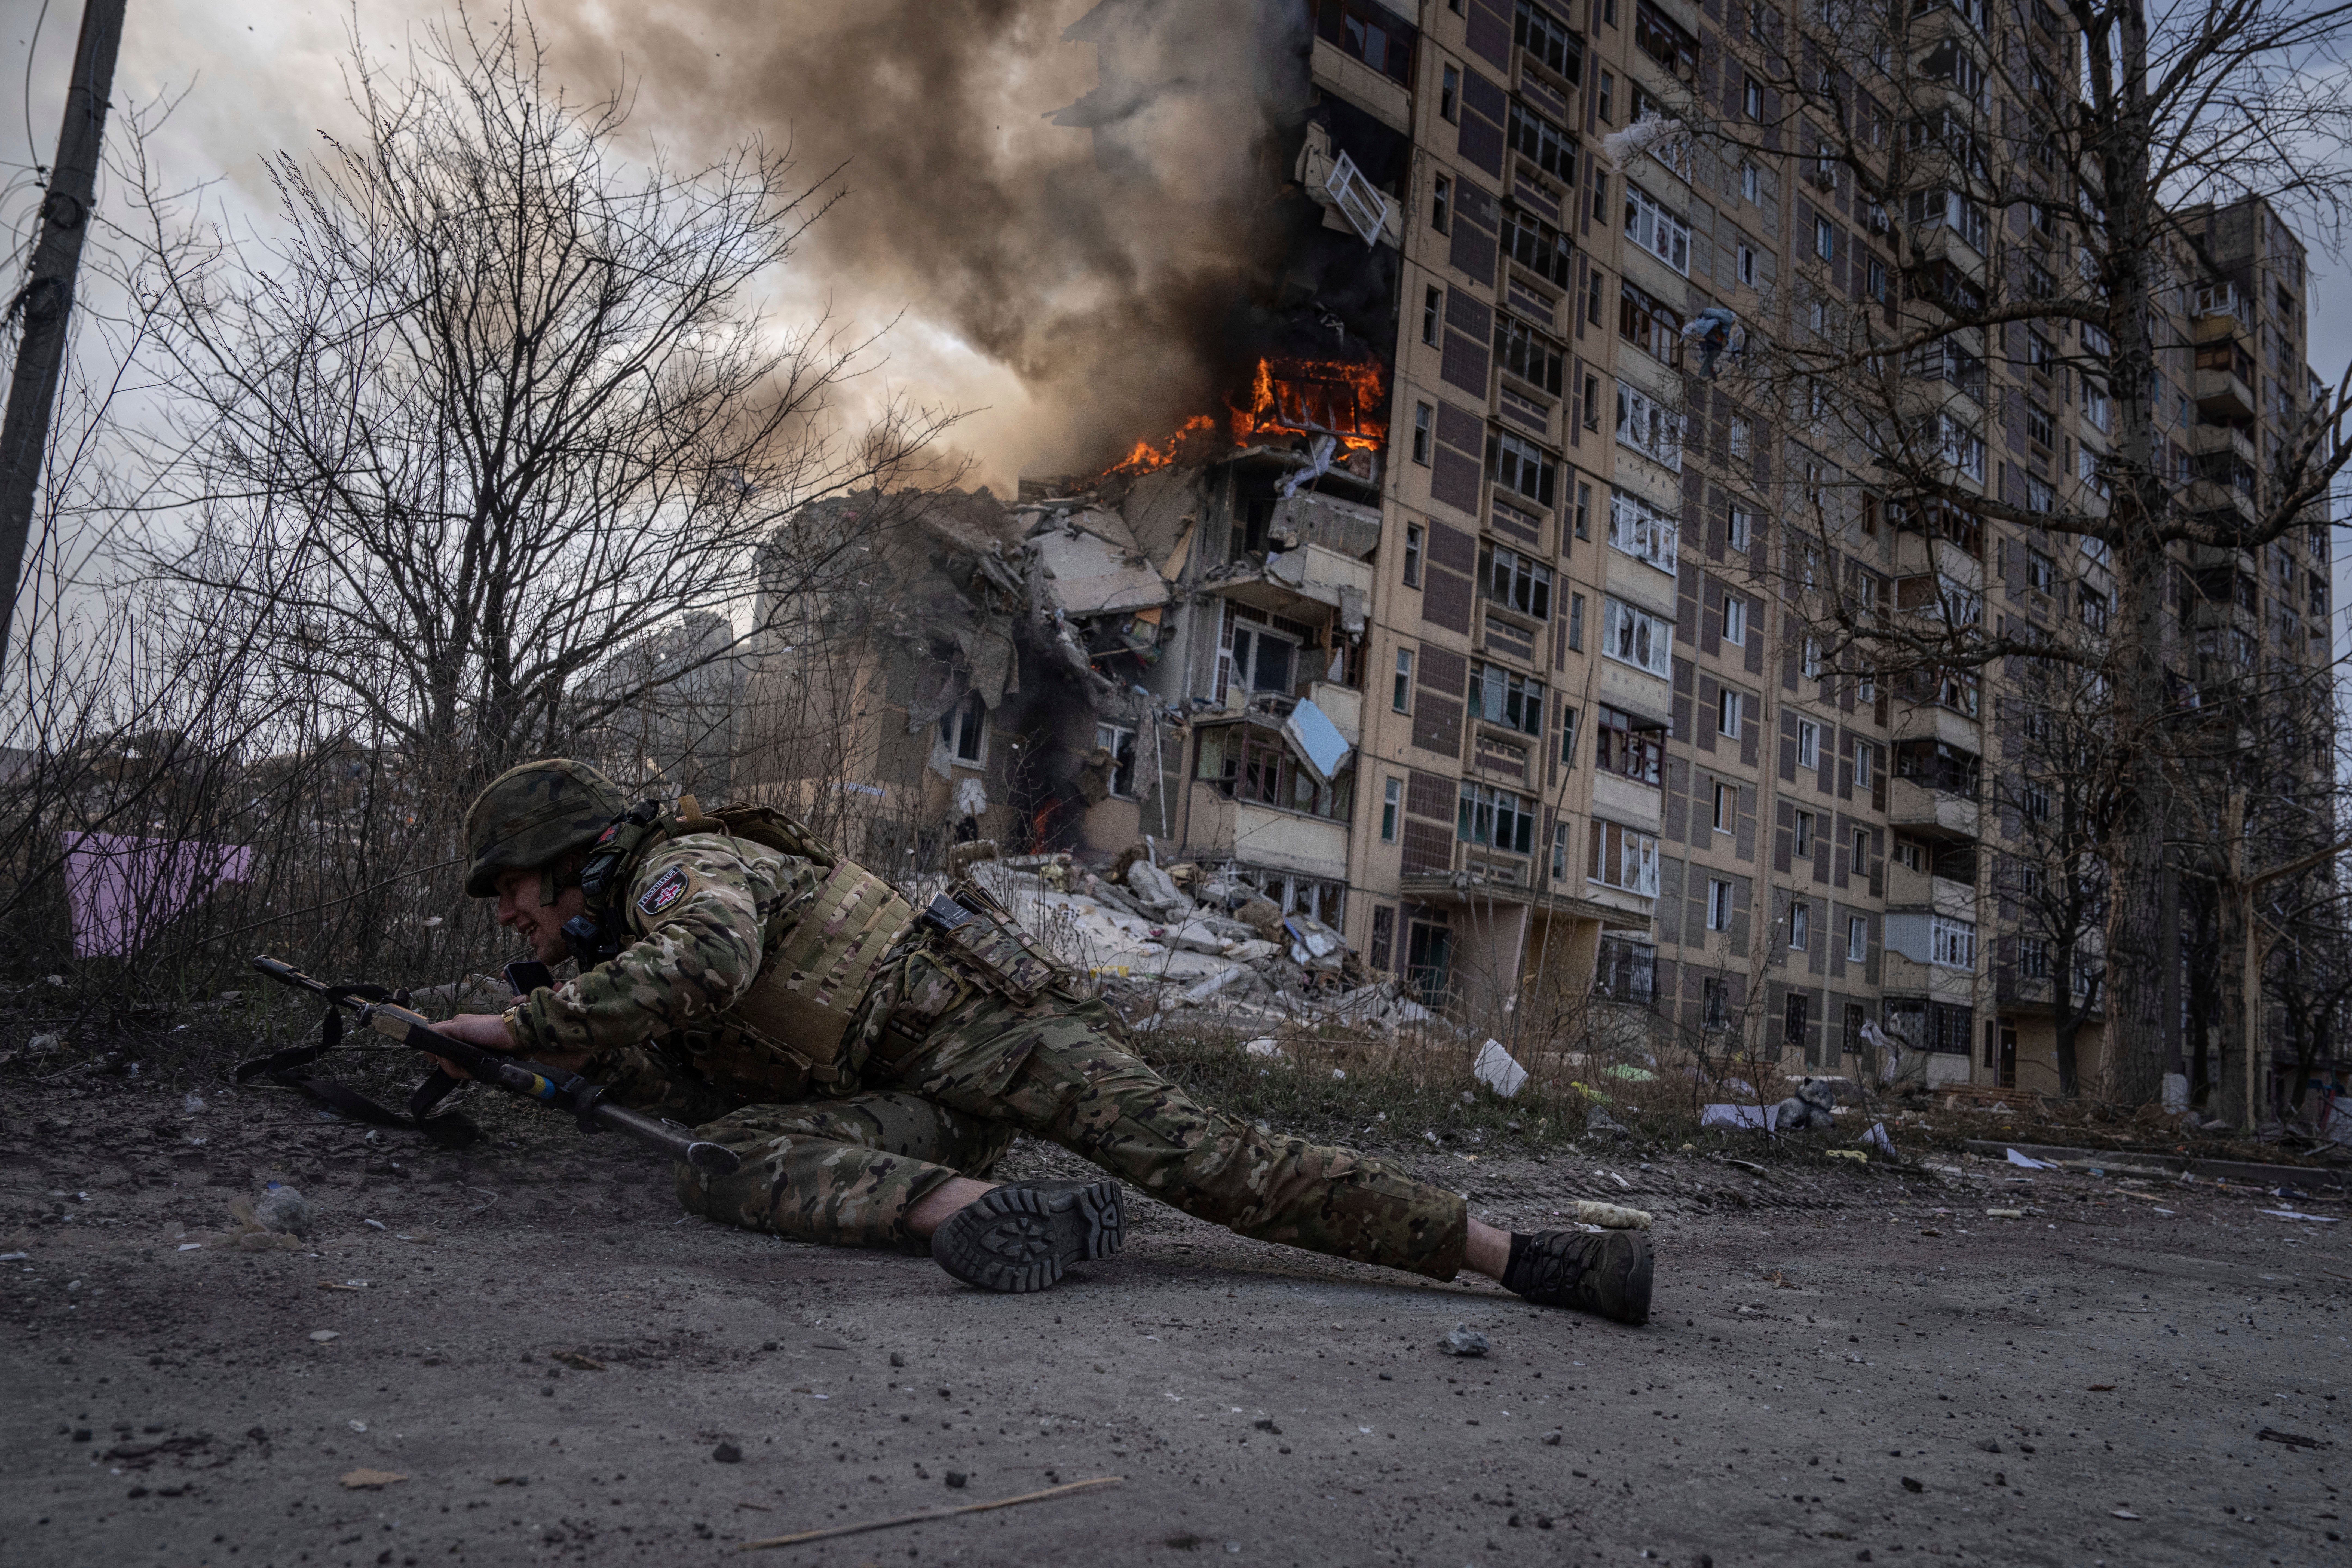 Ukraine’s soldiers are often outnumbered and outgunned by Russian forces as they await delivery of military aid packages